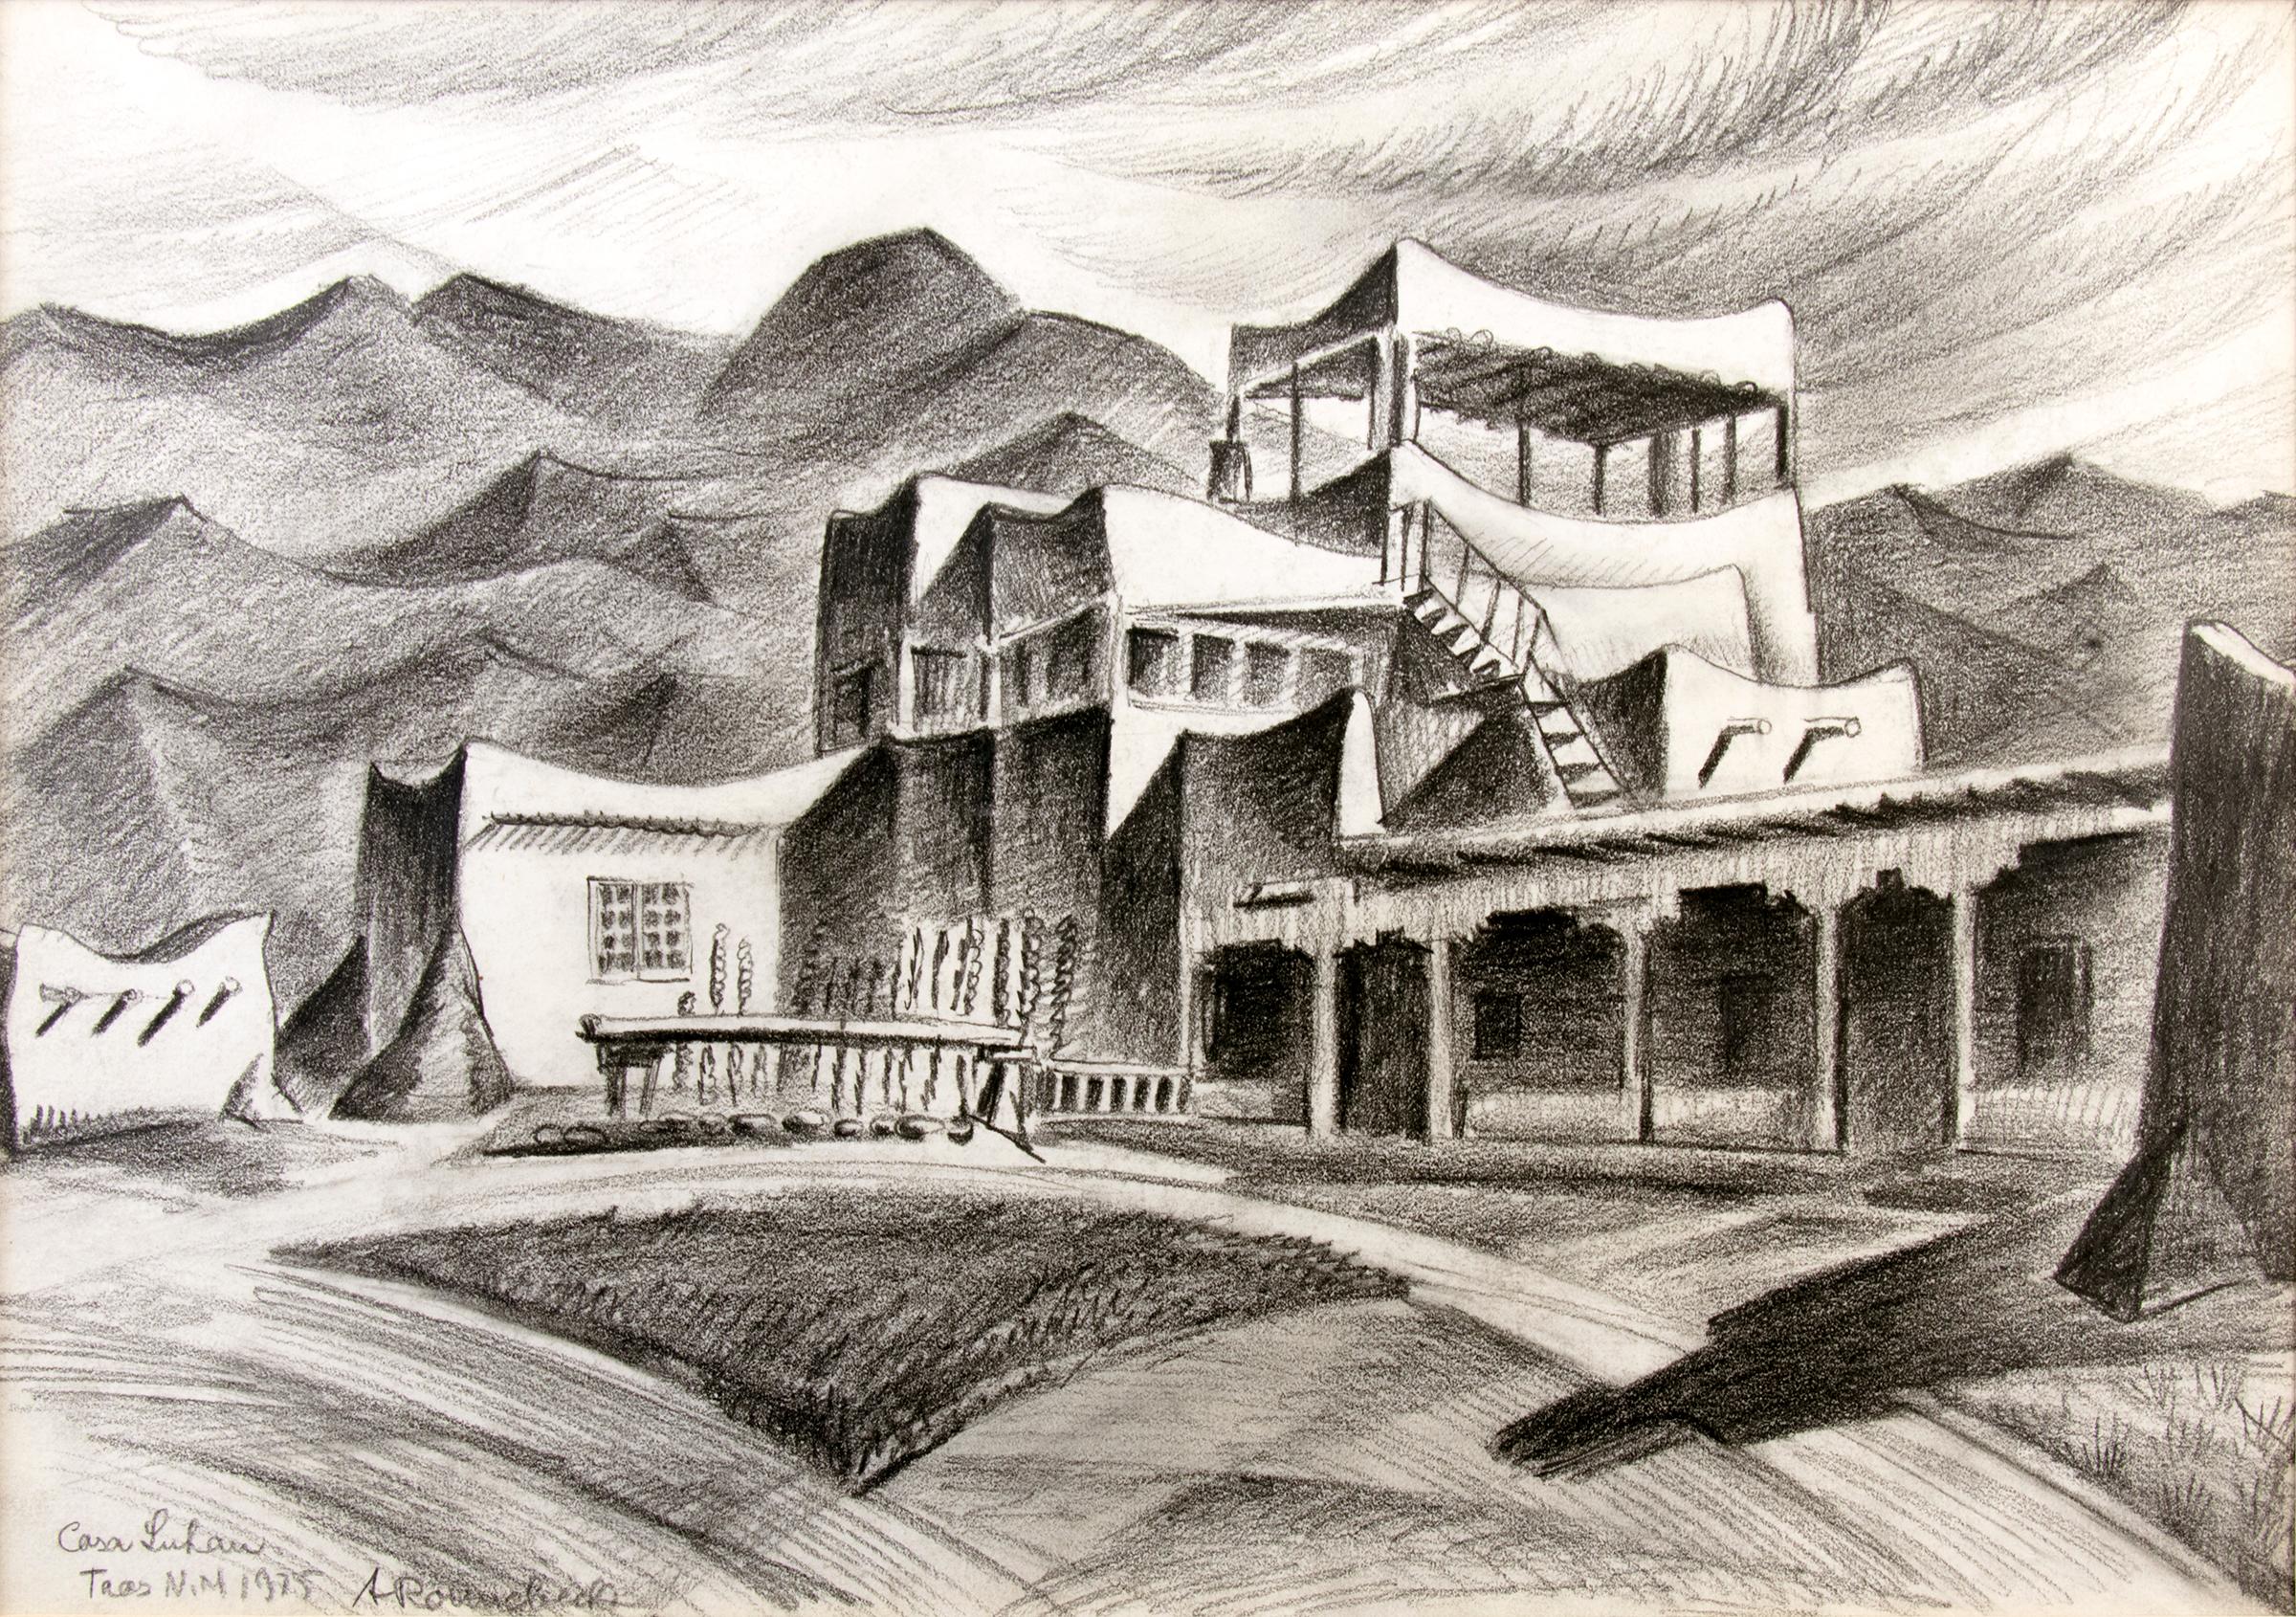 Casa Luhan, Adobe Home of Mabel Dodge Luhan, Taos, New Mexico, Landscape - Art by Arnold Ronnebeck